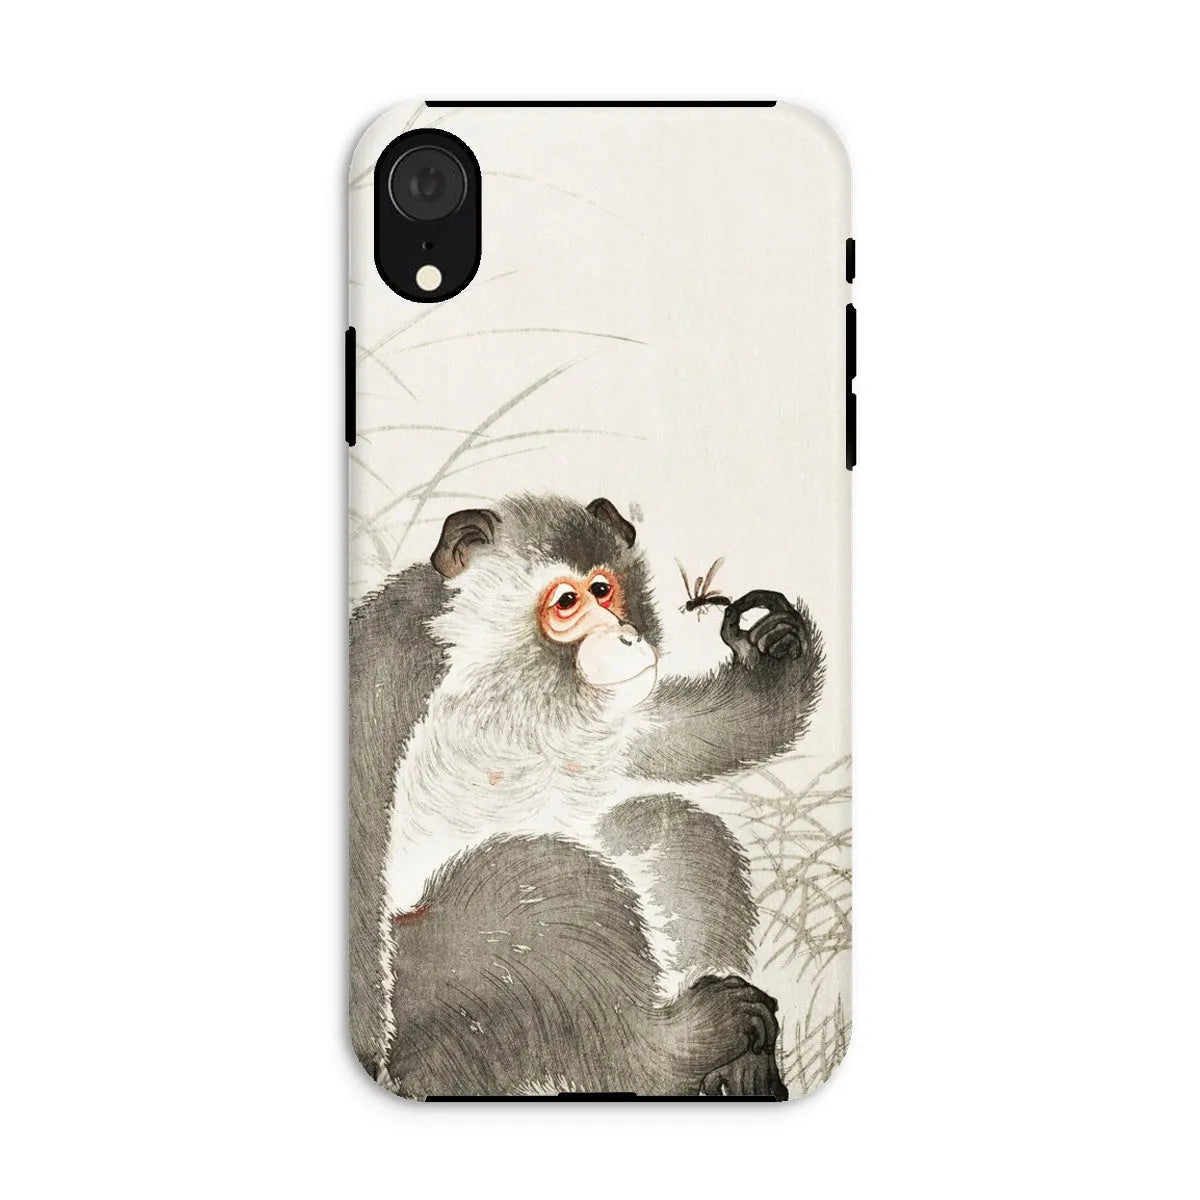 Monkey With Insect - Shin-hanga Art Phone Case - Ohara Koson - Iphone Xr / Matte - Mobile Phone Cases - Aesthetic Art